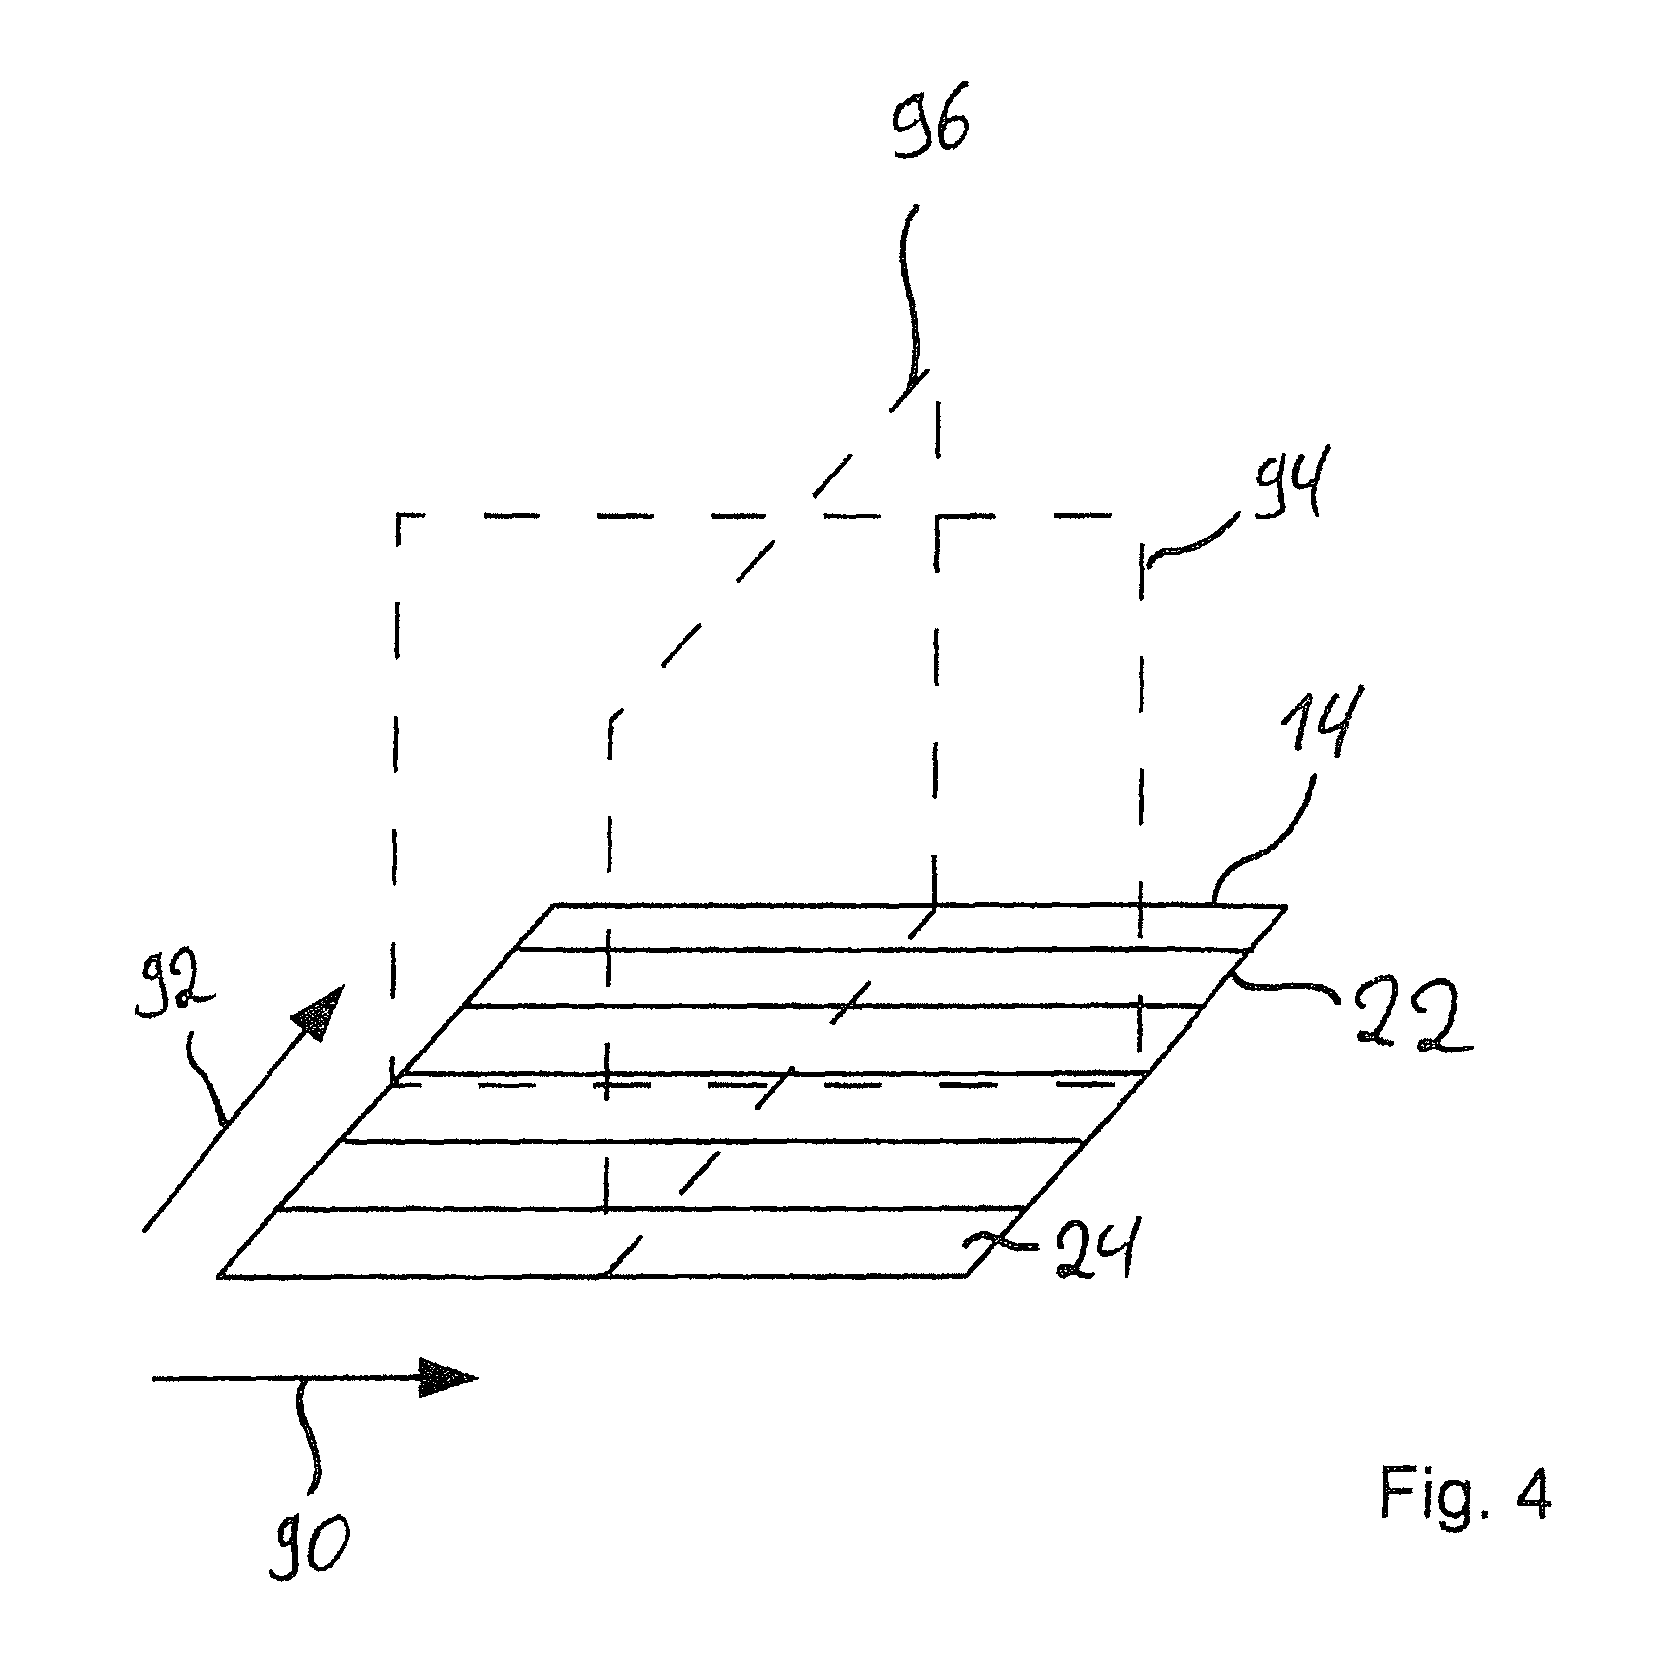 Antenna apparatus and method for electronically pivoting a radar beam